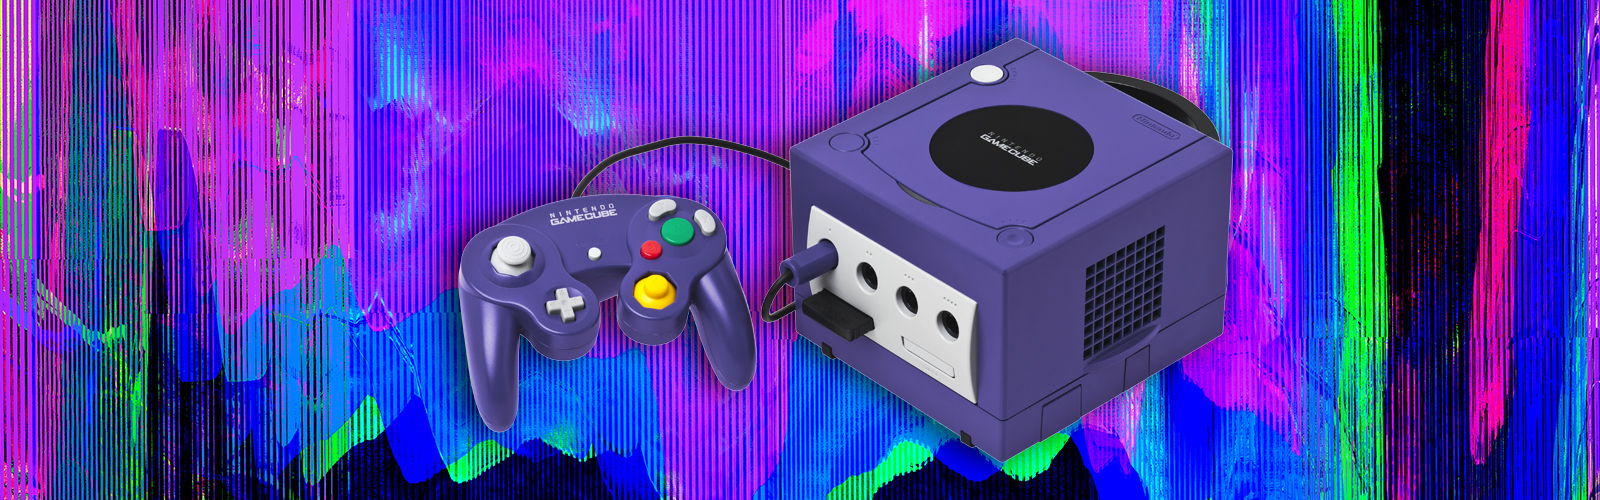 Celebrating The GameCube’s 20th Anniversary With 20 Of Its Best Games